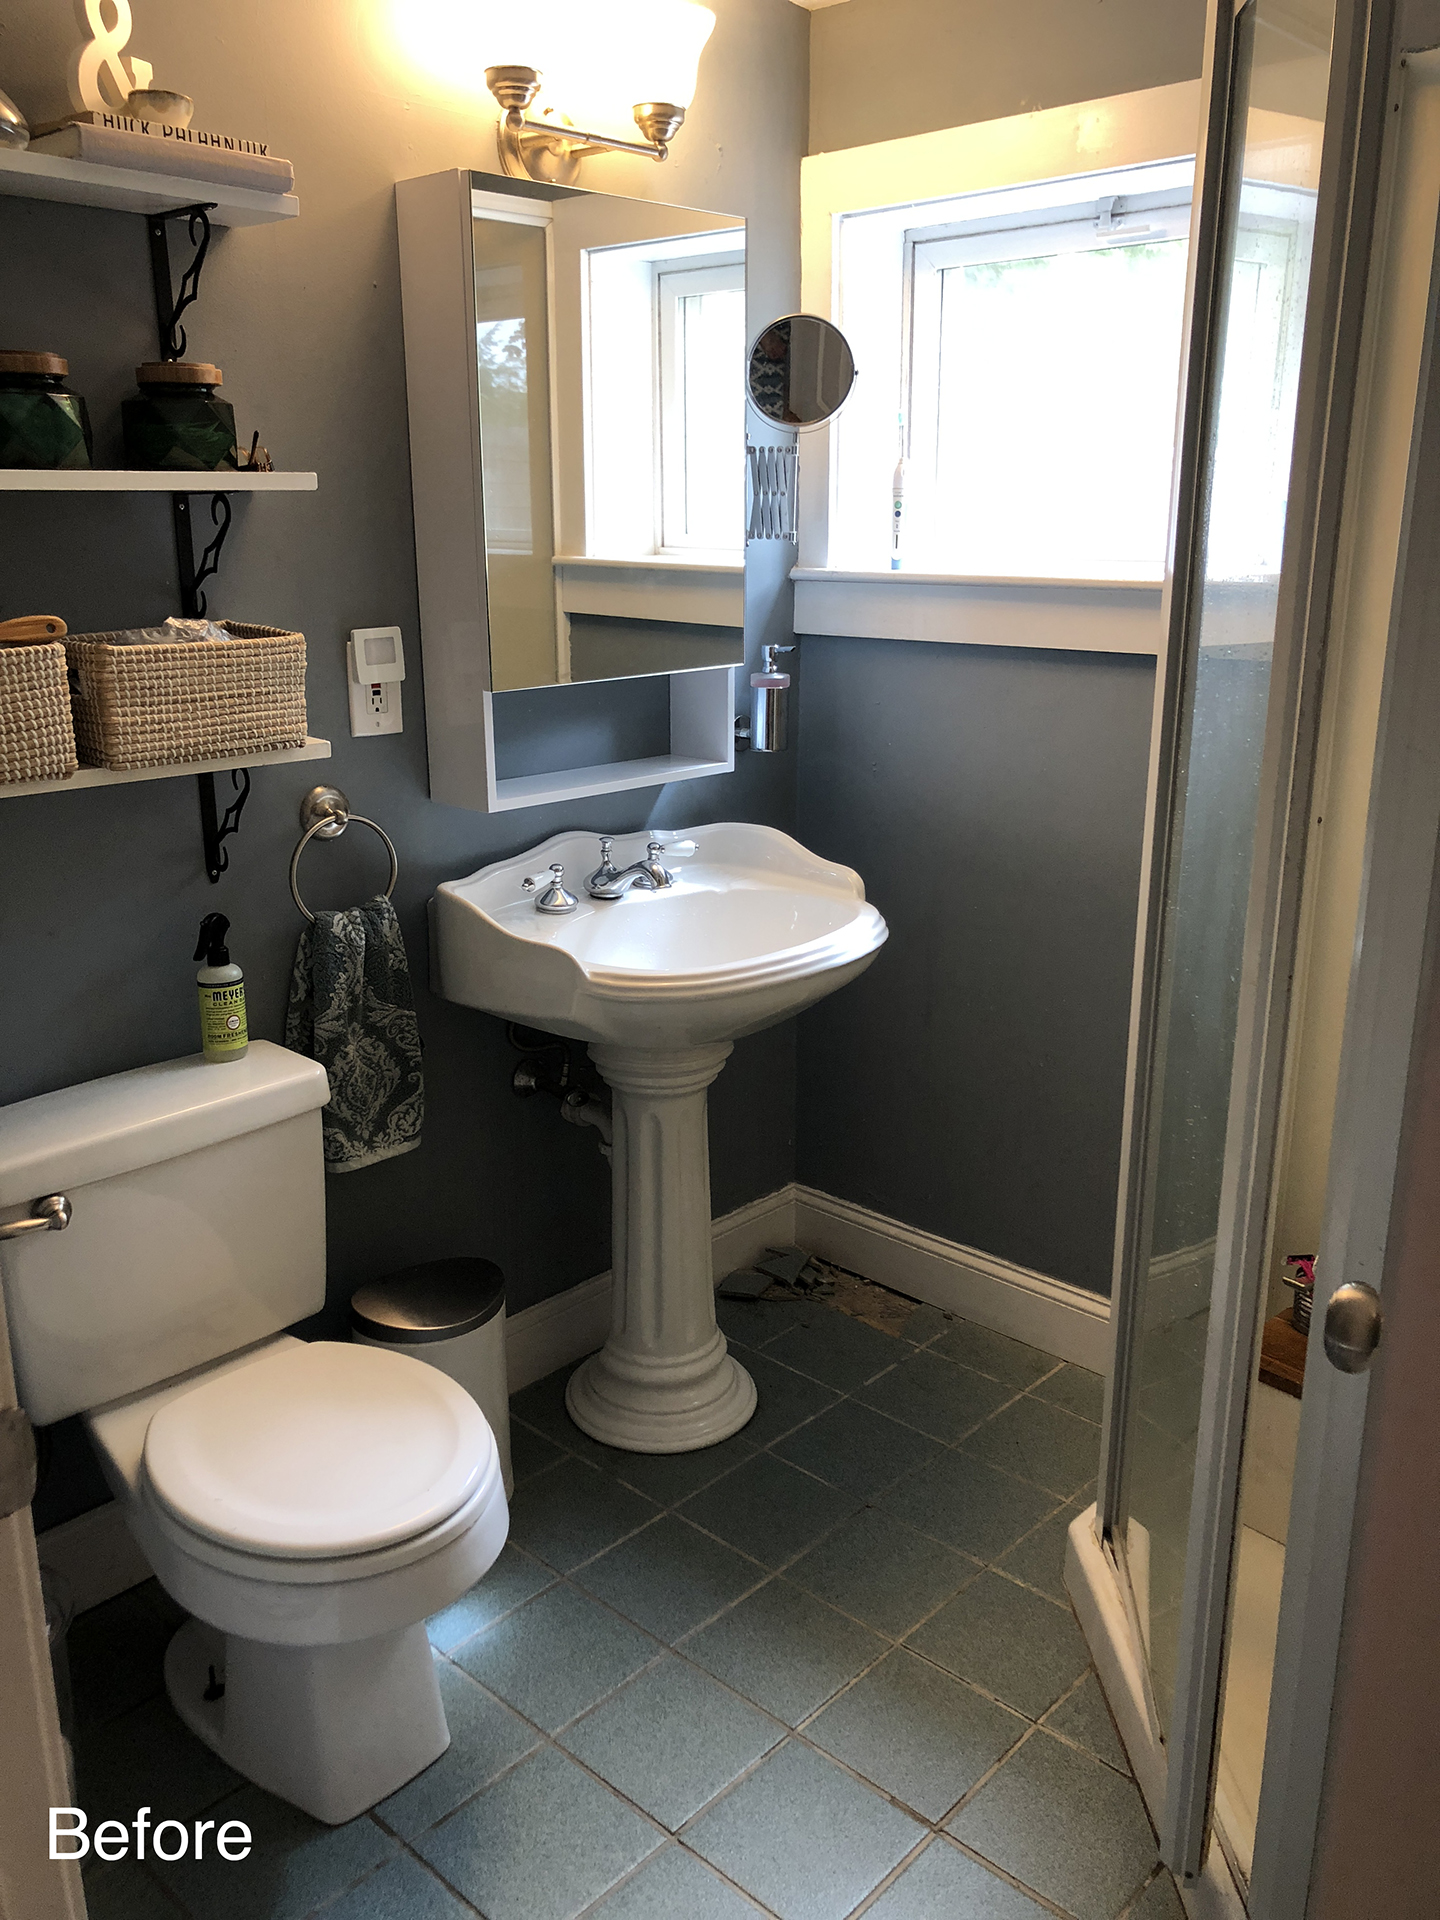 One Room Challenge: Small Bathroom Makeover Reveal! /// By Design Fixation #bathroom #small #tile